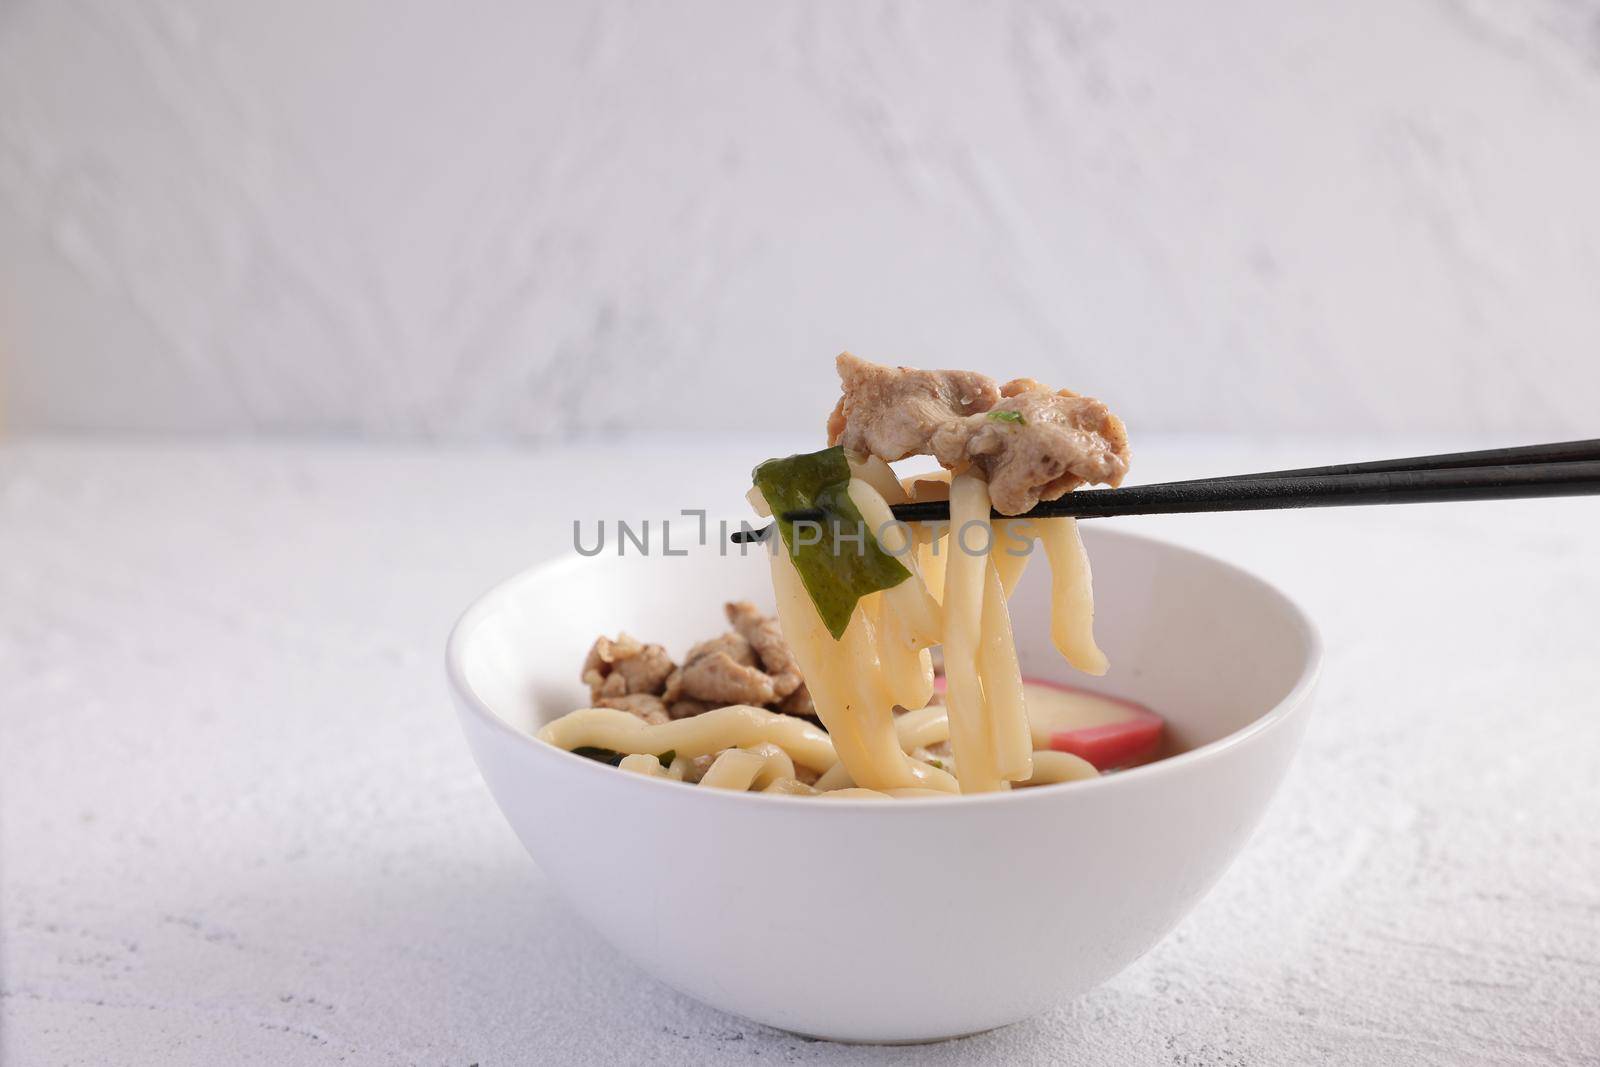 Udon noodles with pork isolated in white background by piyato